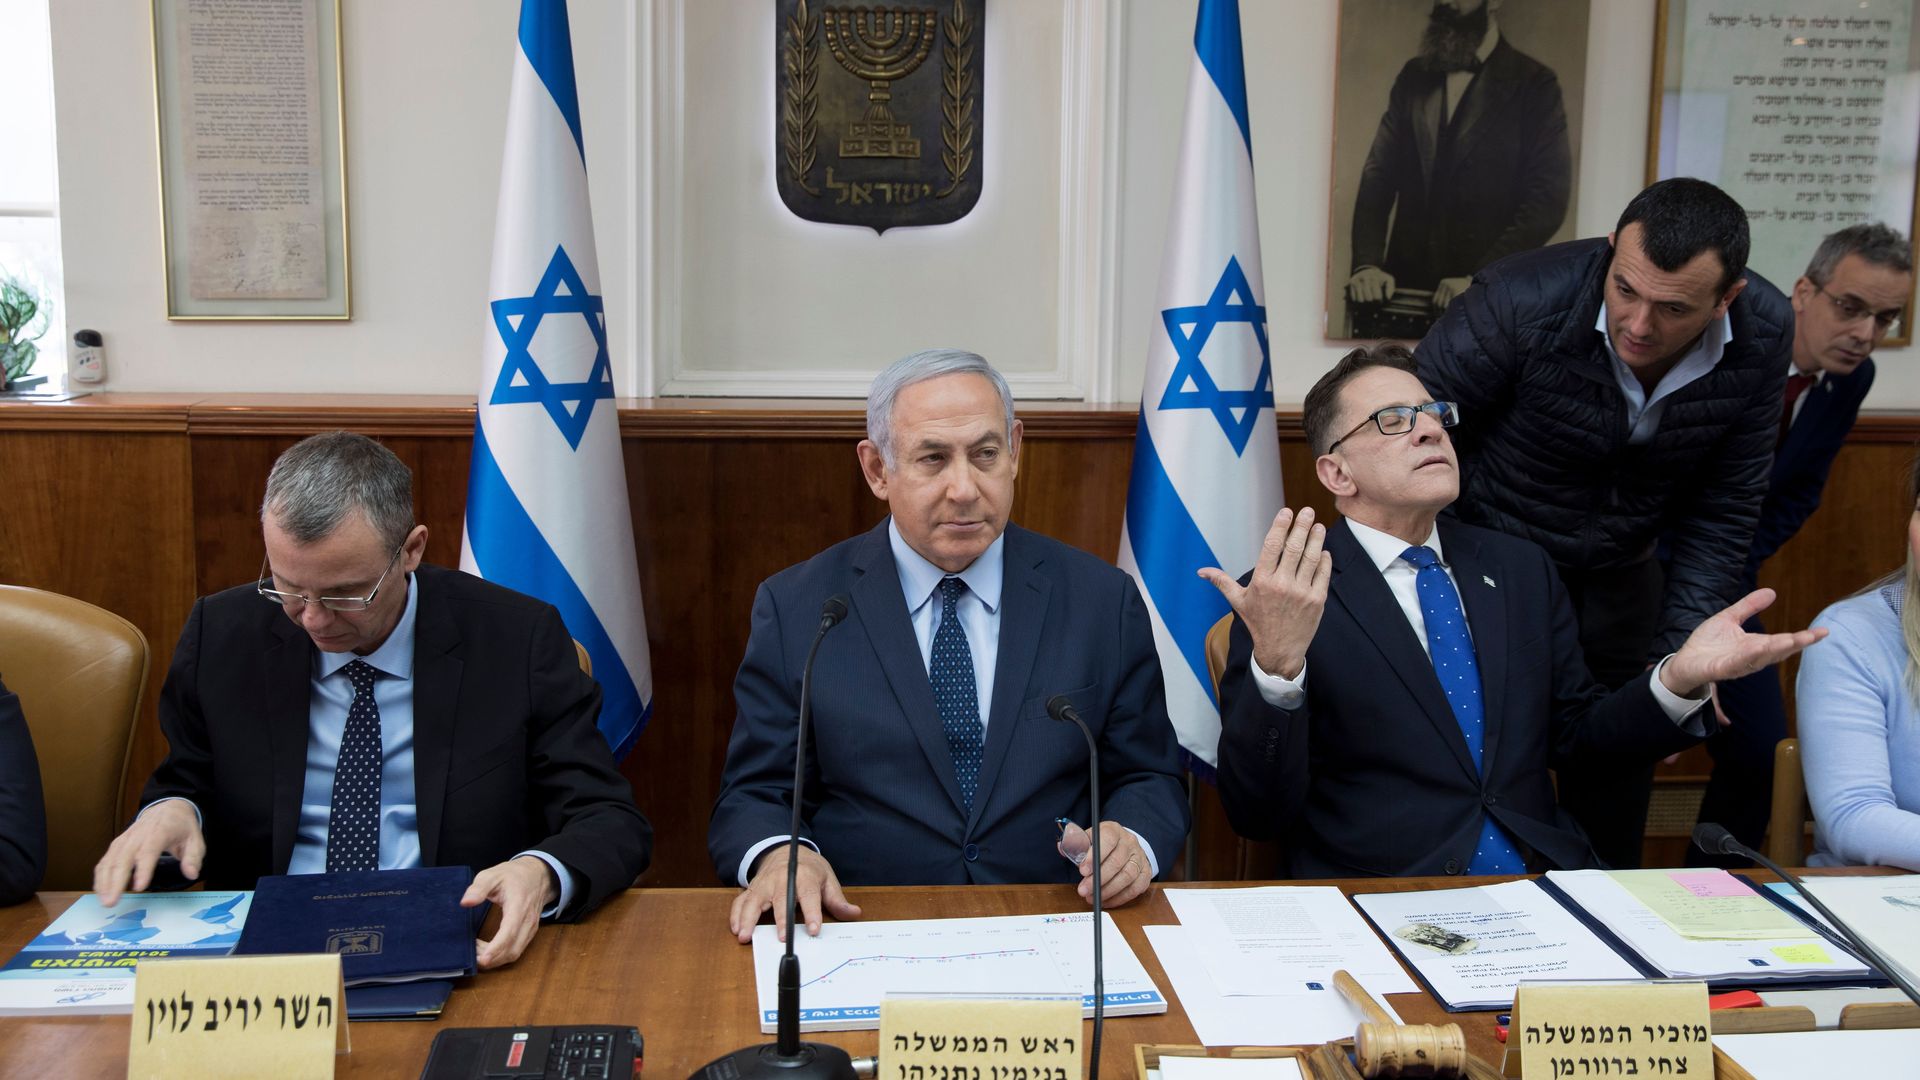 Netanyahu with officials